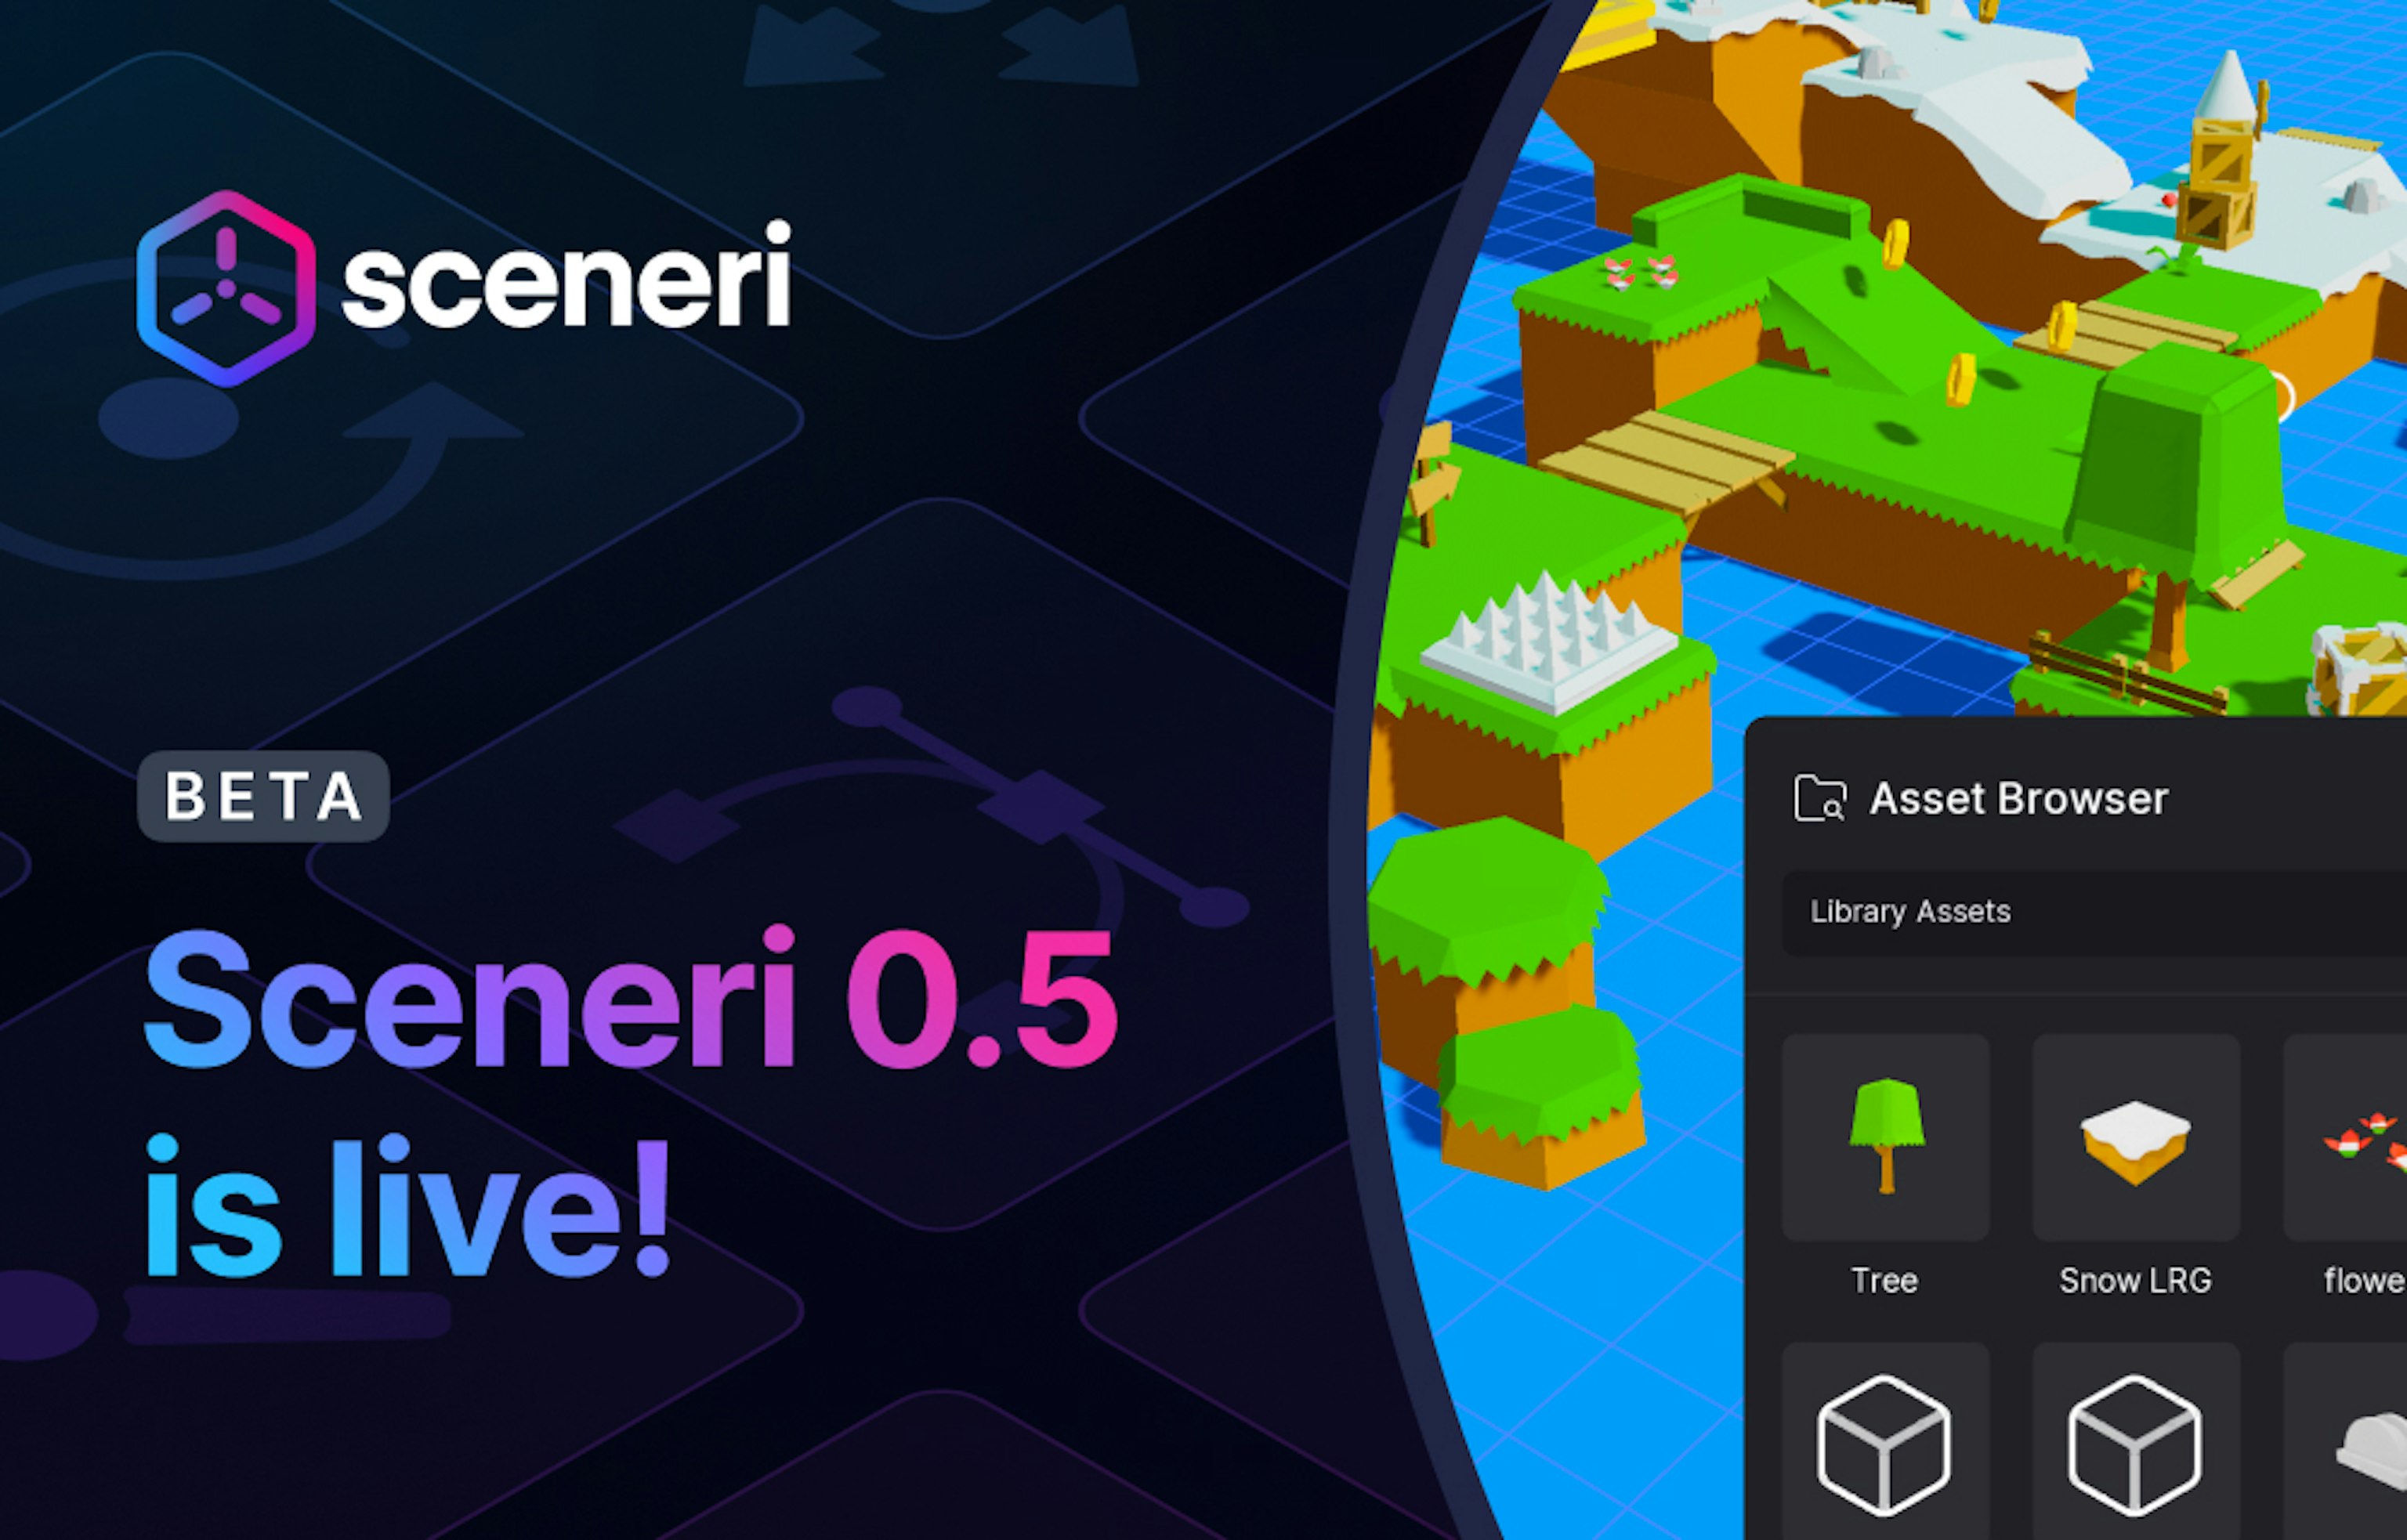 Sceneri’s New Update: Our Most User-Friendly Version Yet!